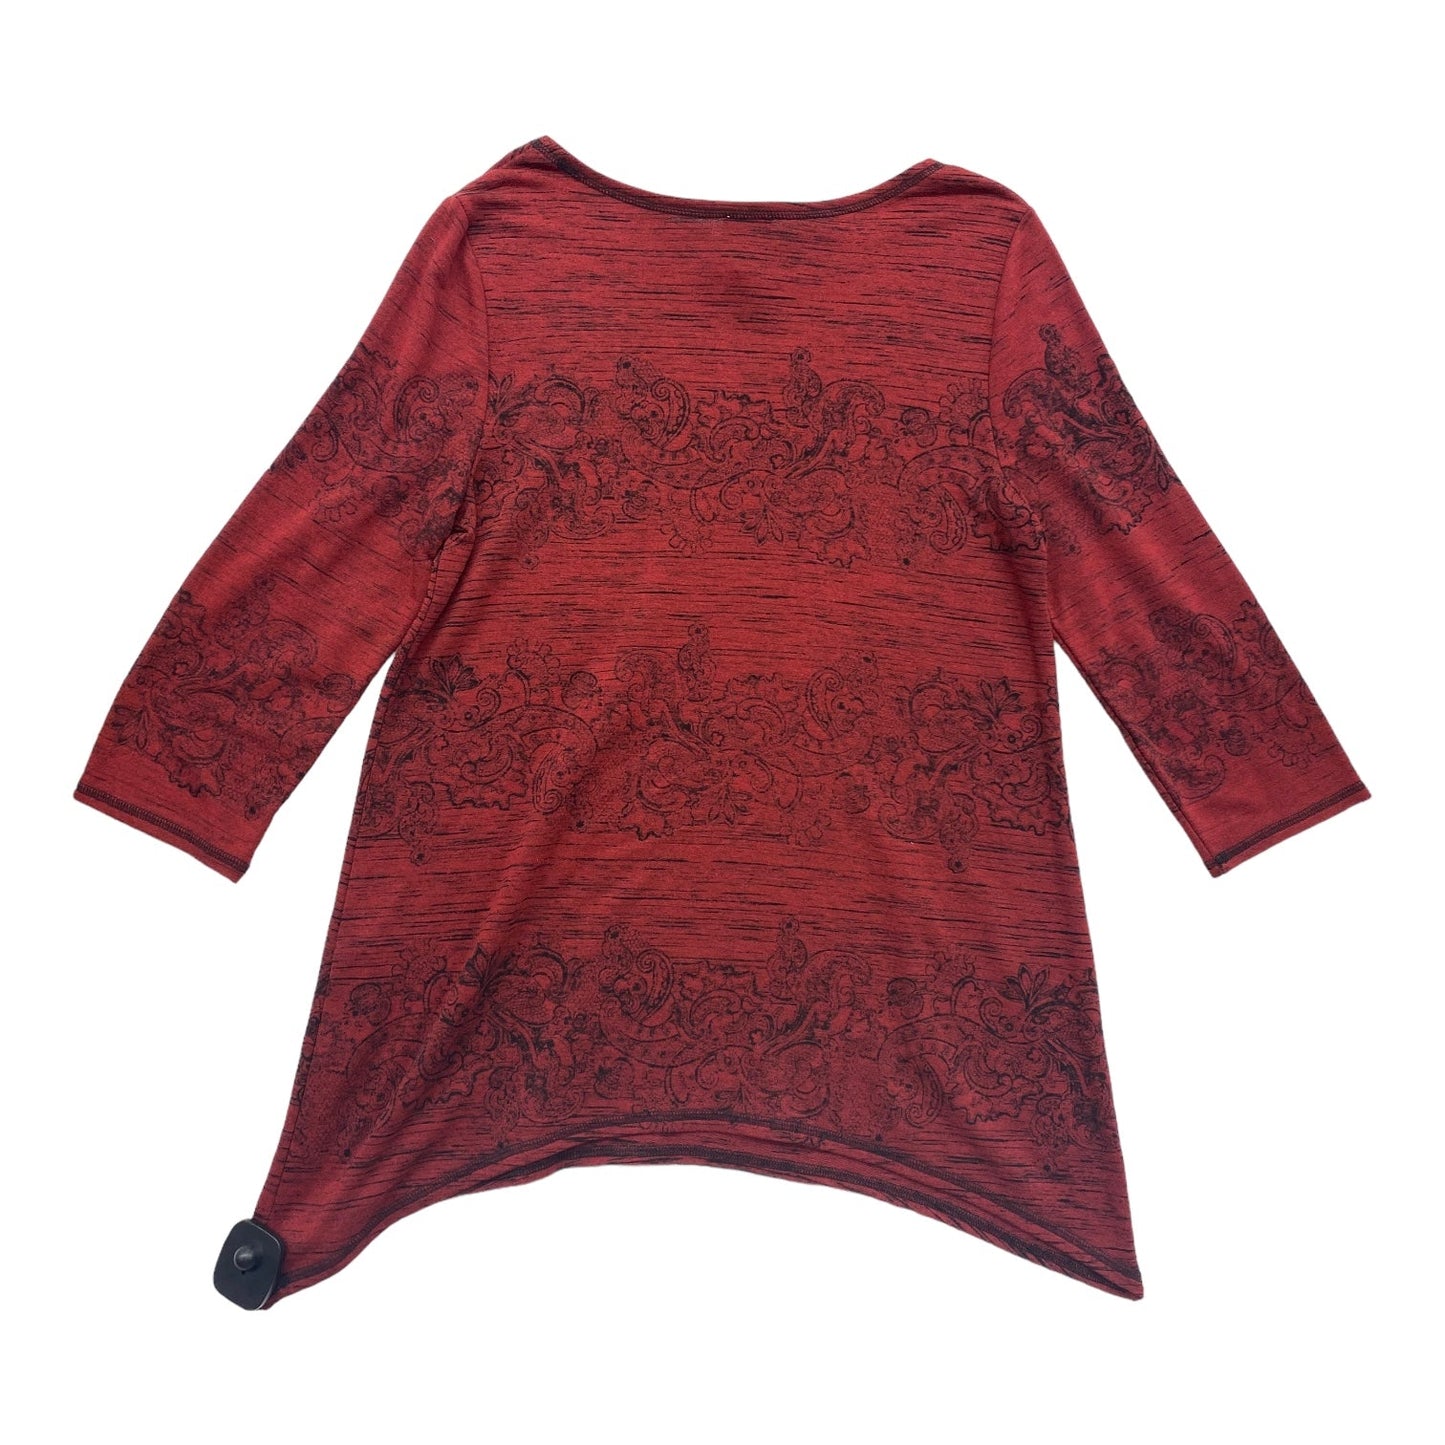 Black & Red Top Long Sleeve Chicos, Size S